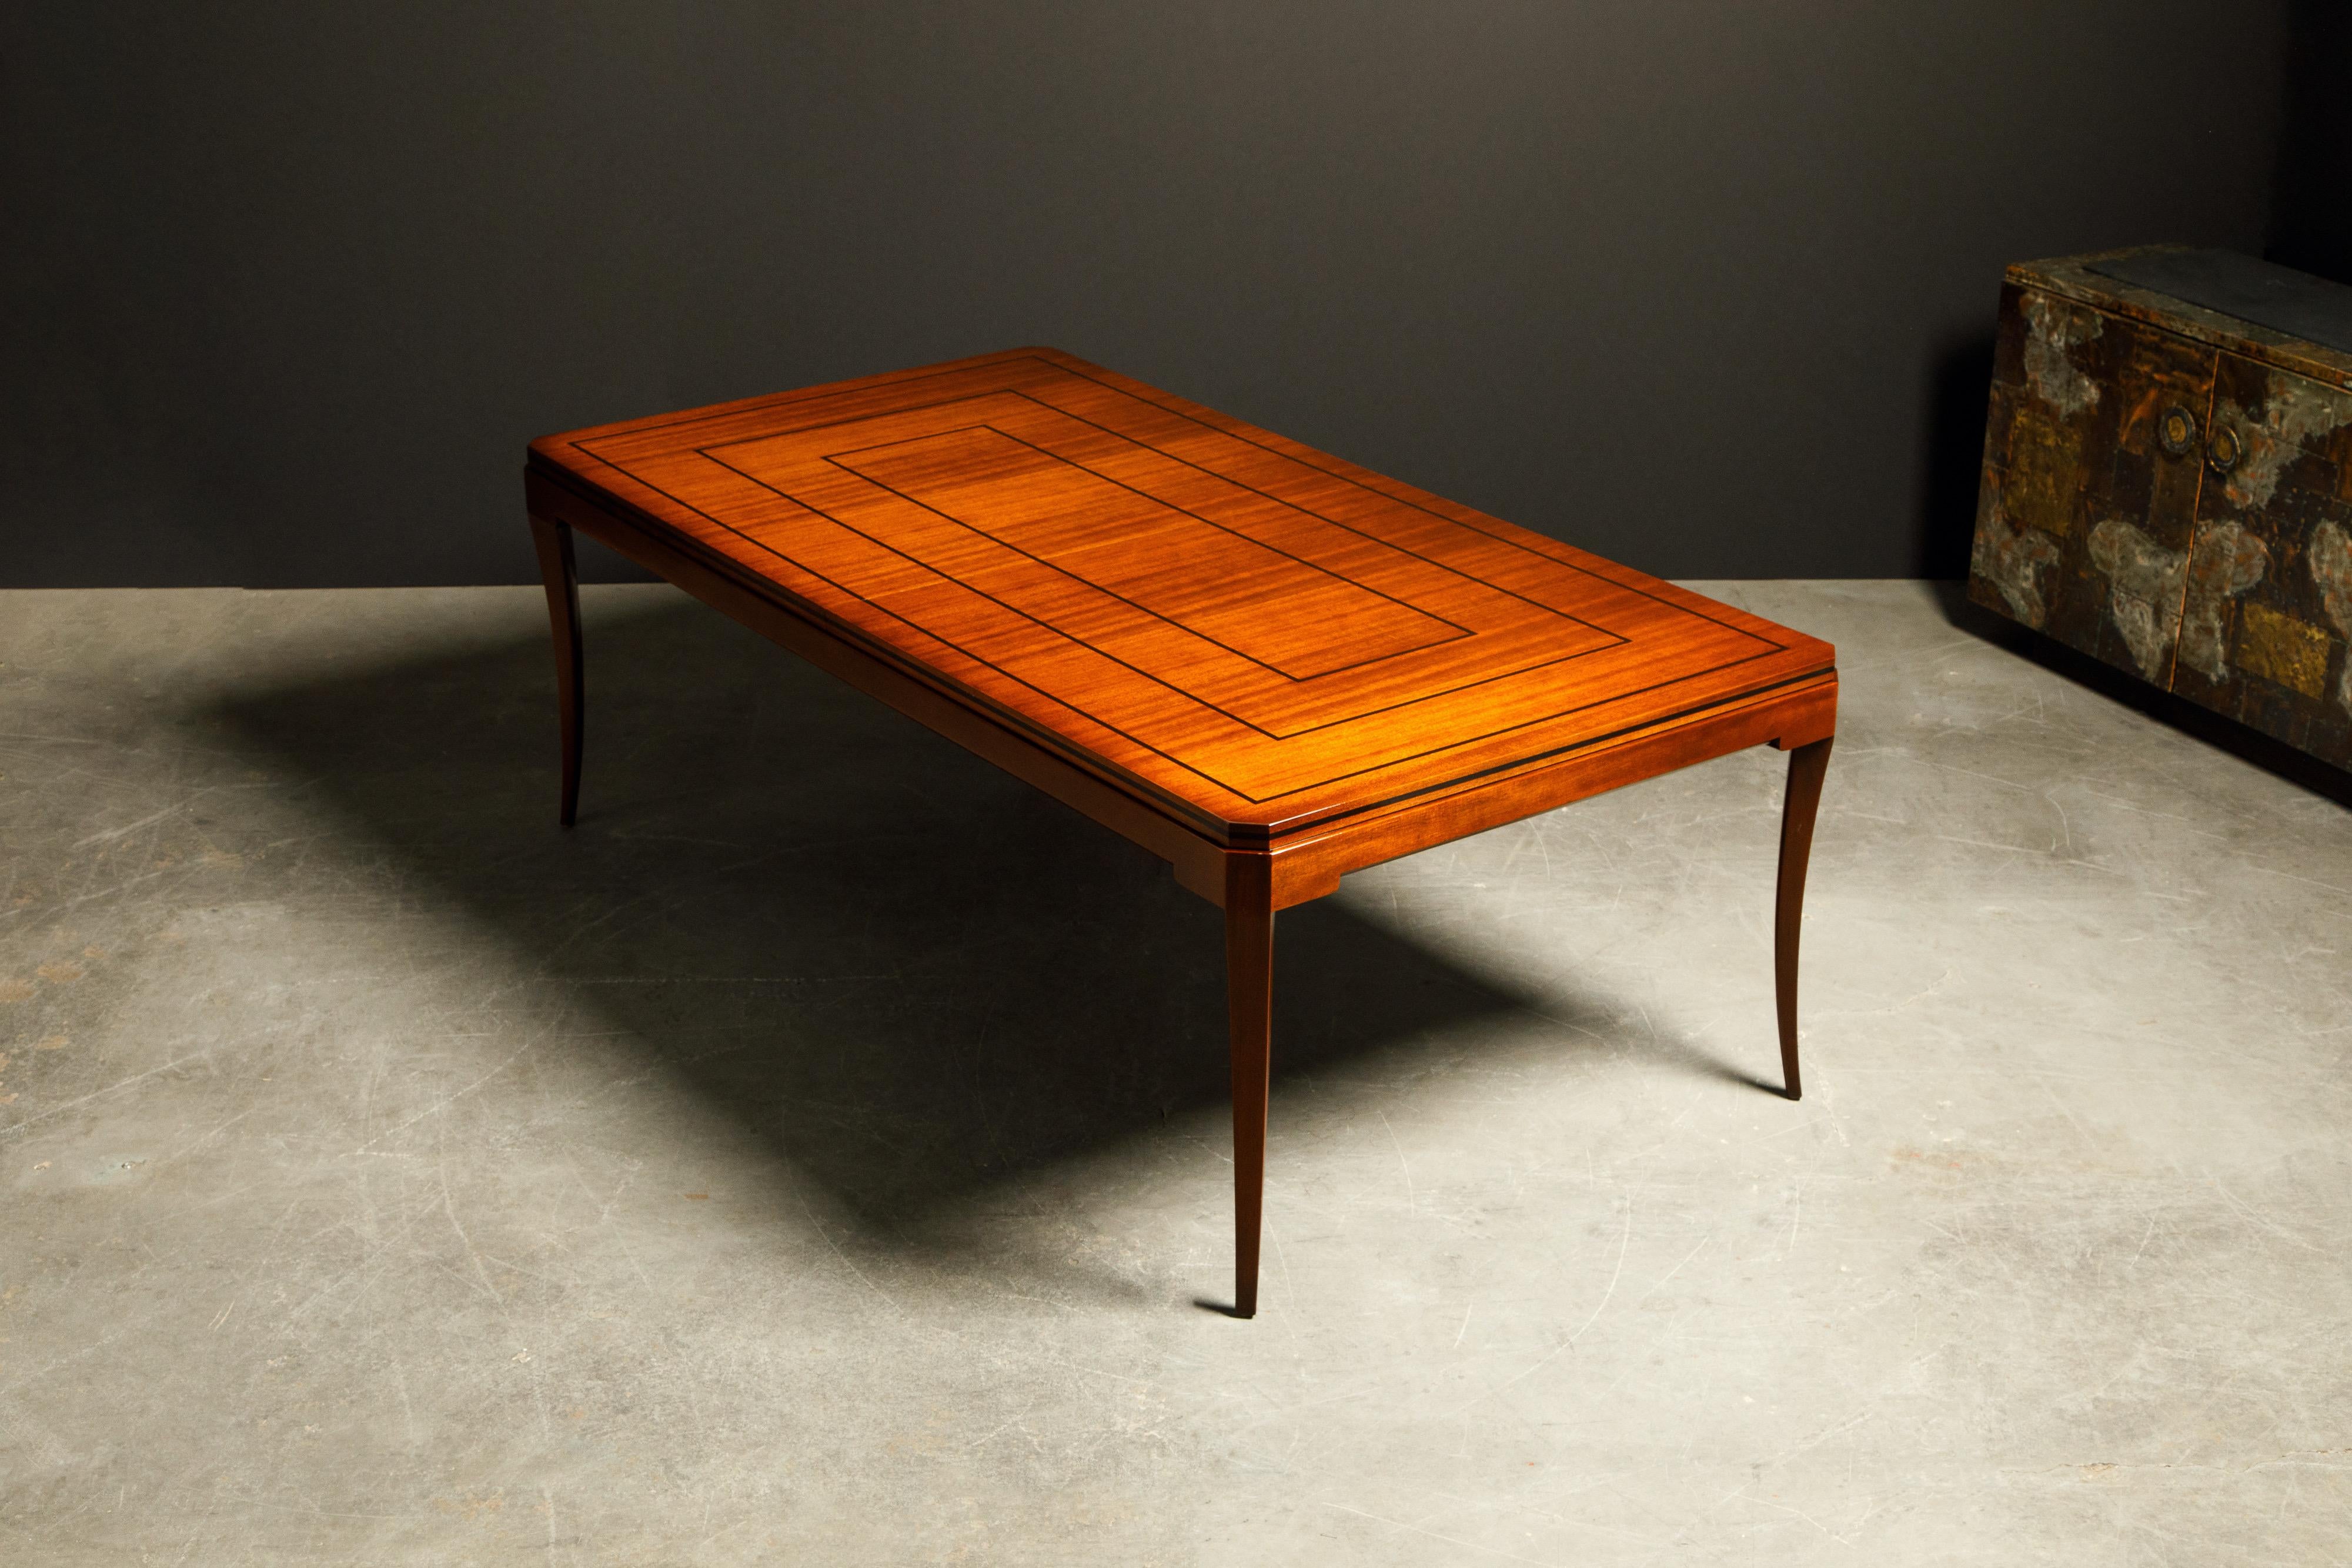 Mid-20th Century Tommi Parzinger for Parzinger Originals Mahogany Dining Table, c. 1960, Signed 